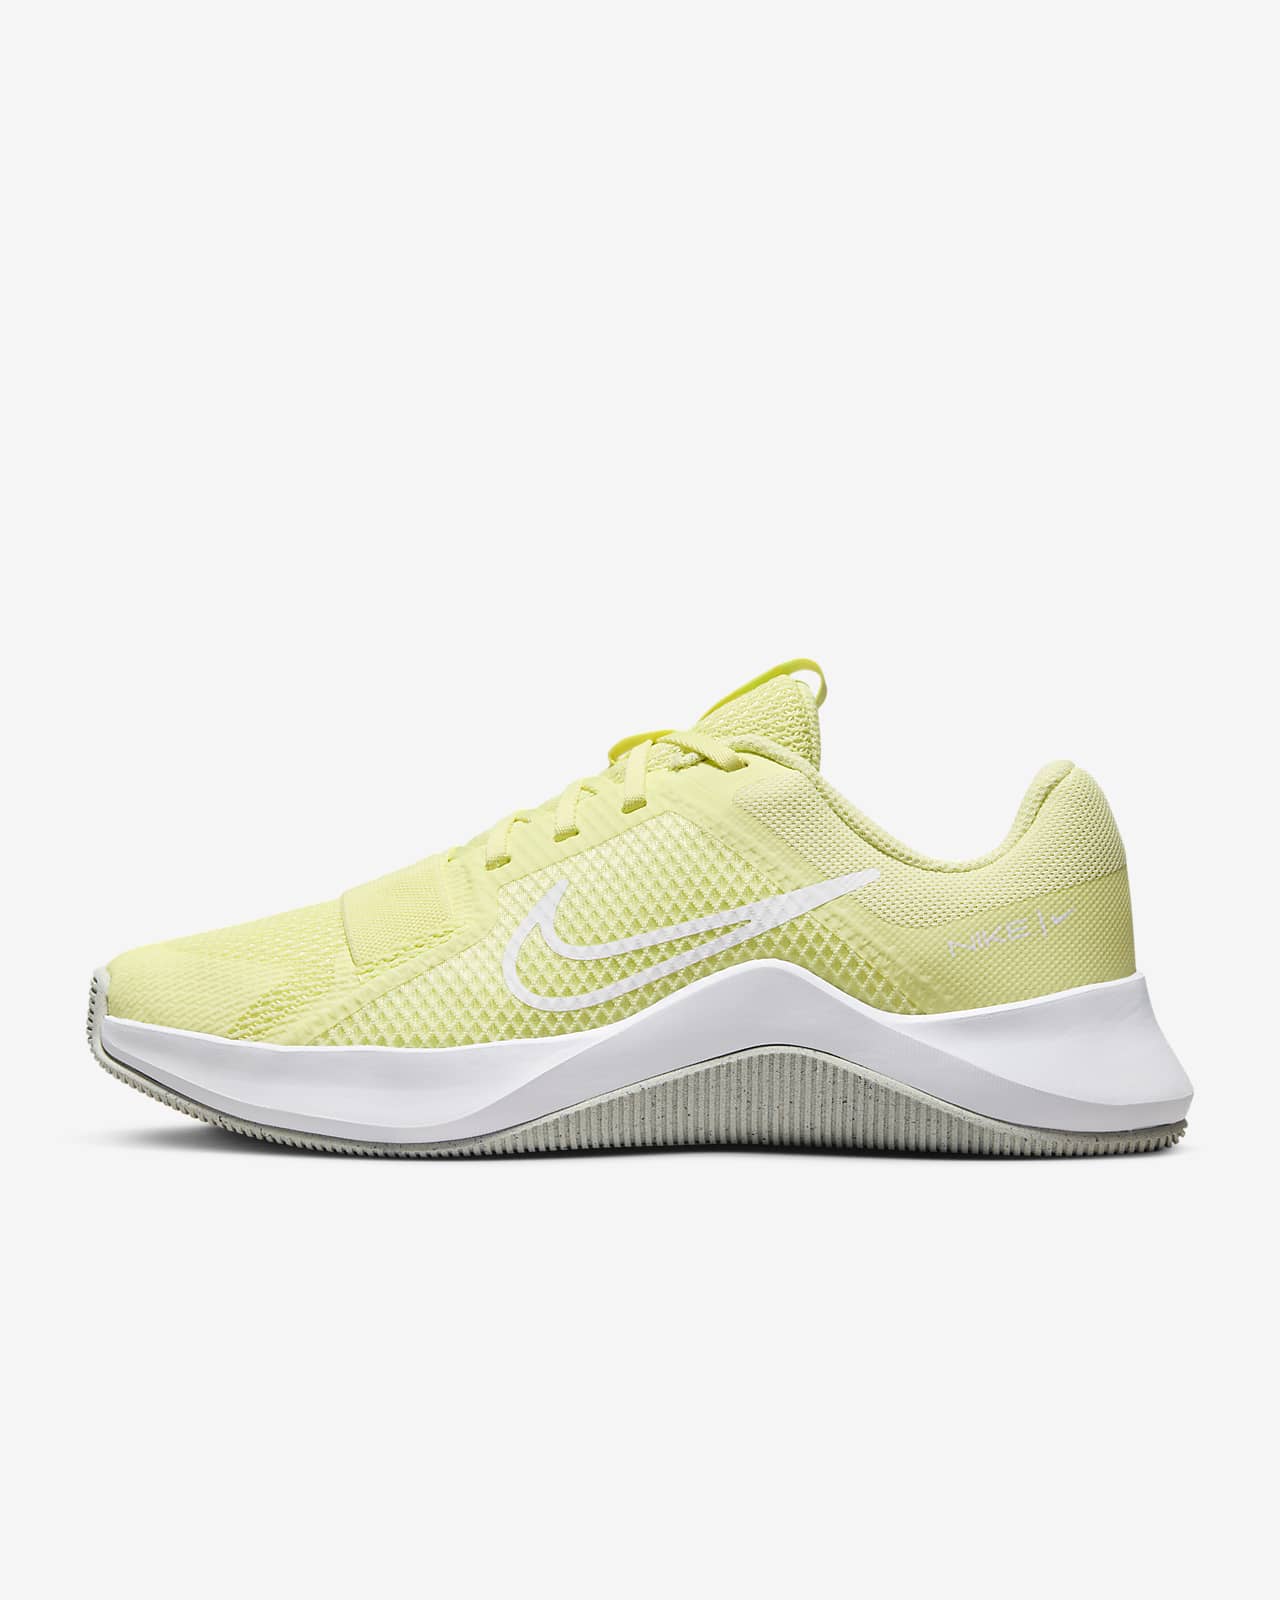 Nike MC Trainer 2 Women's Workout Shoes